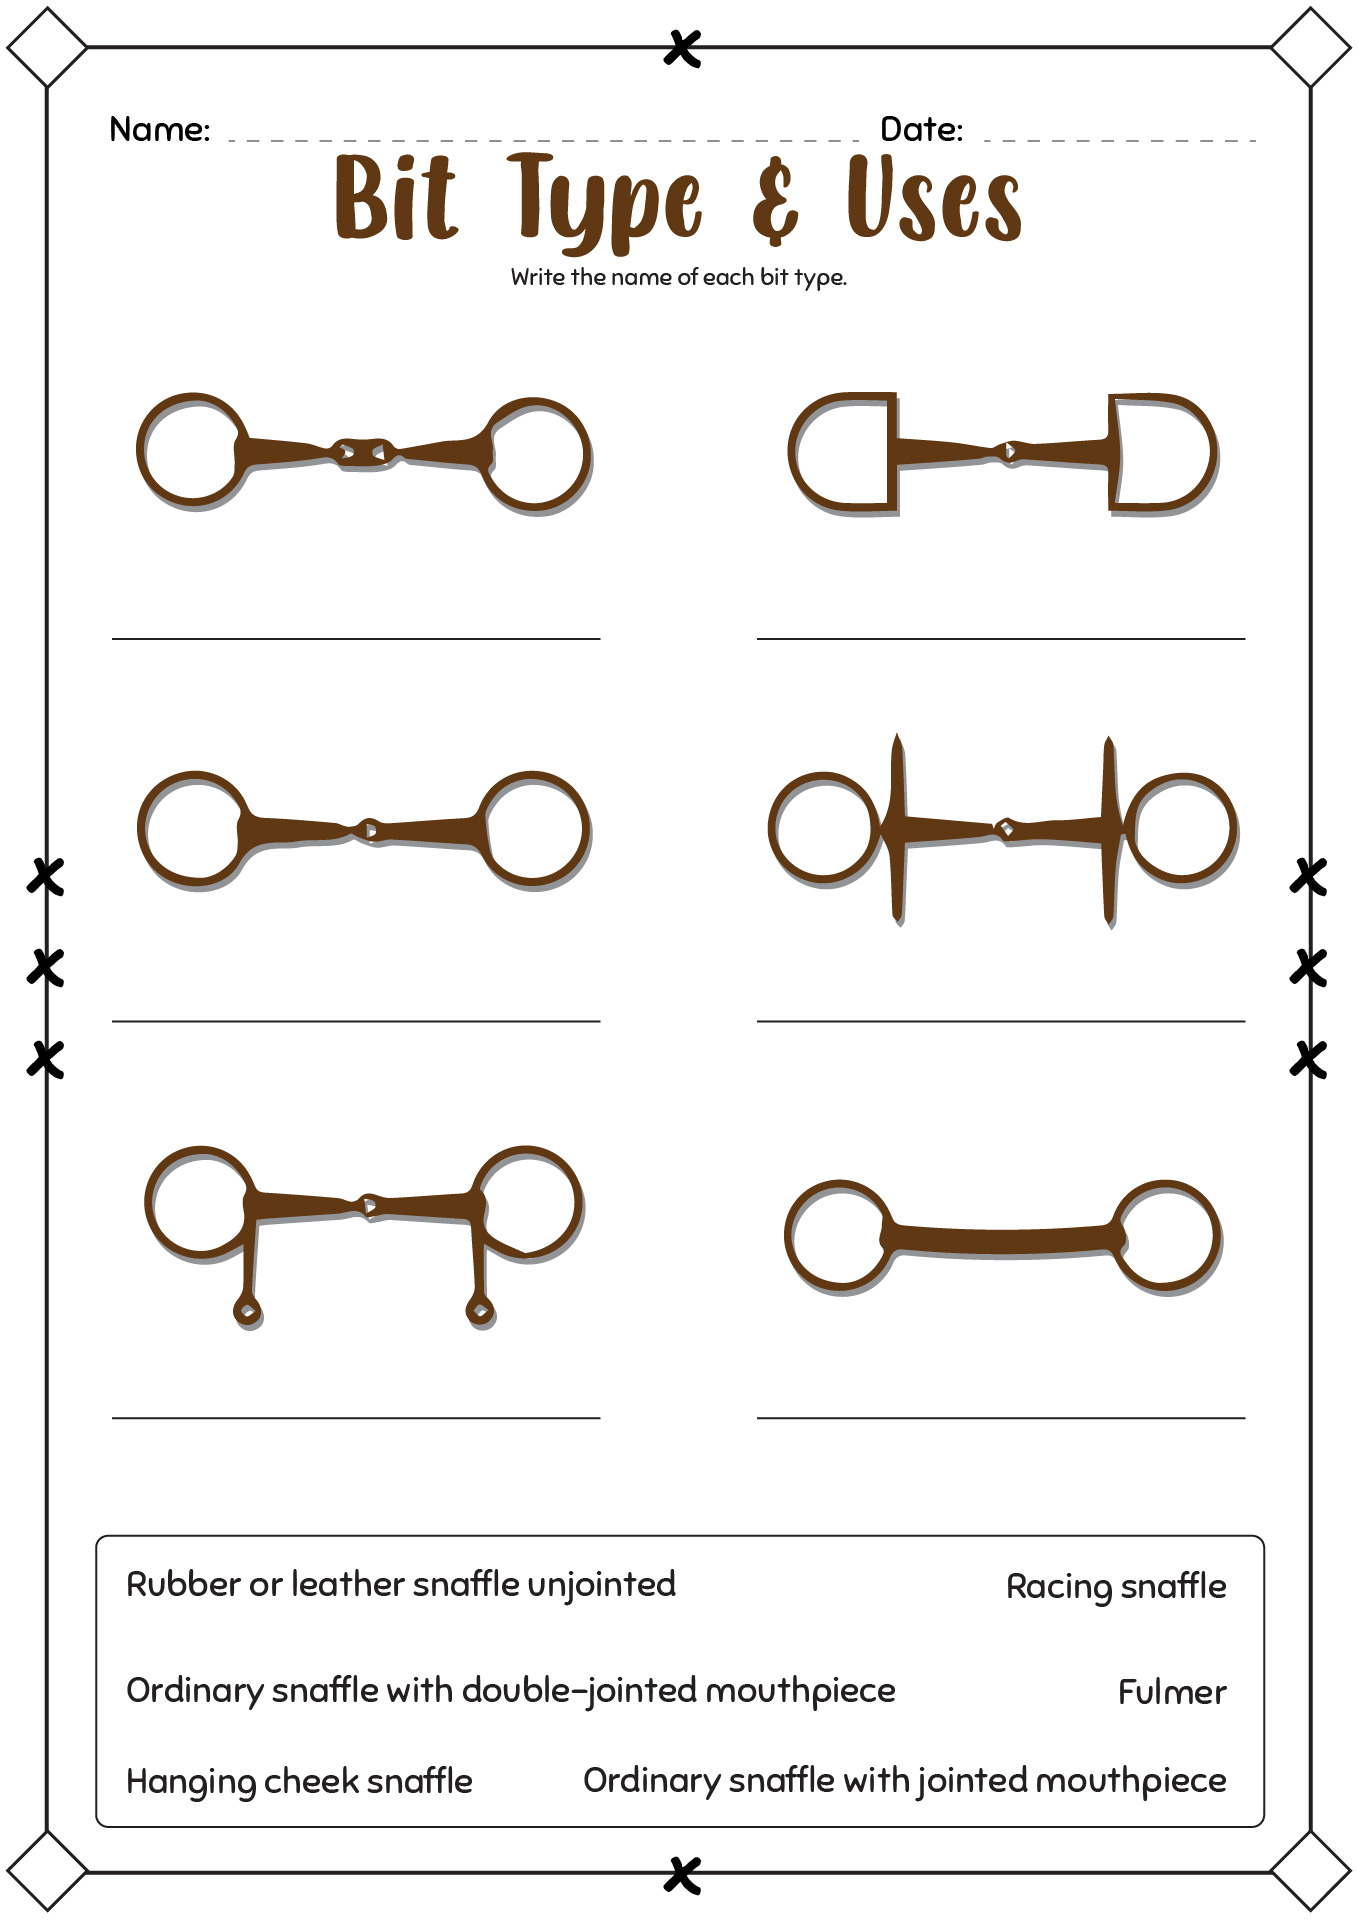 Horse Bit Types and Uses